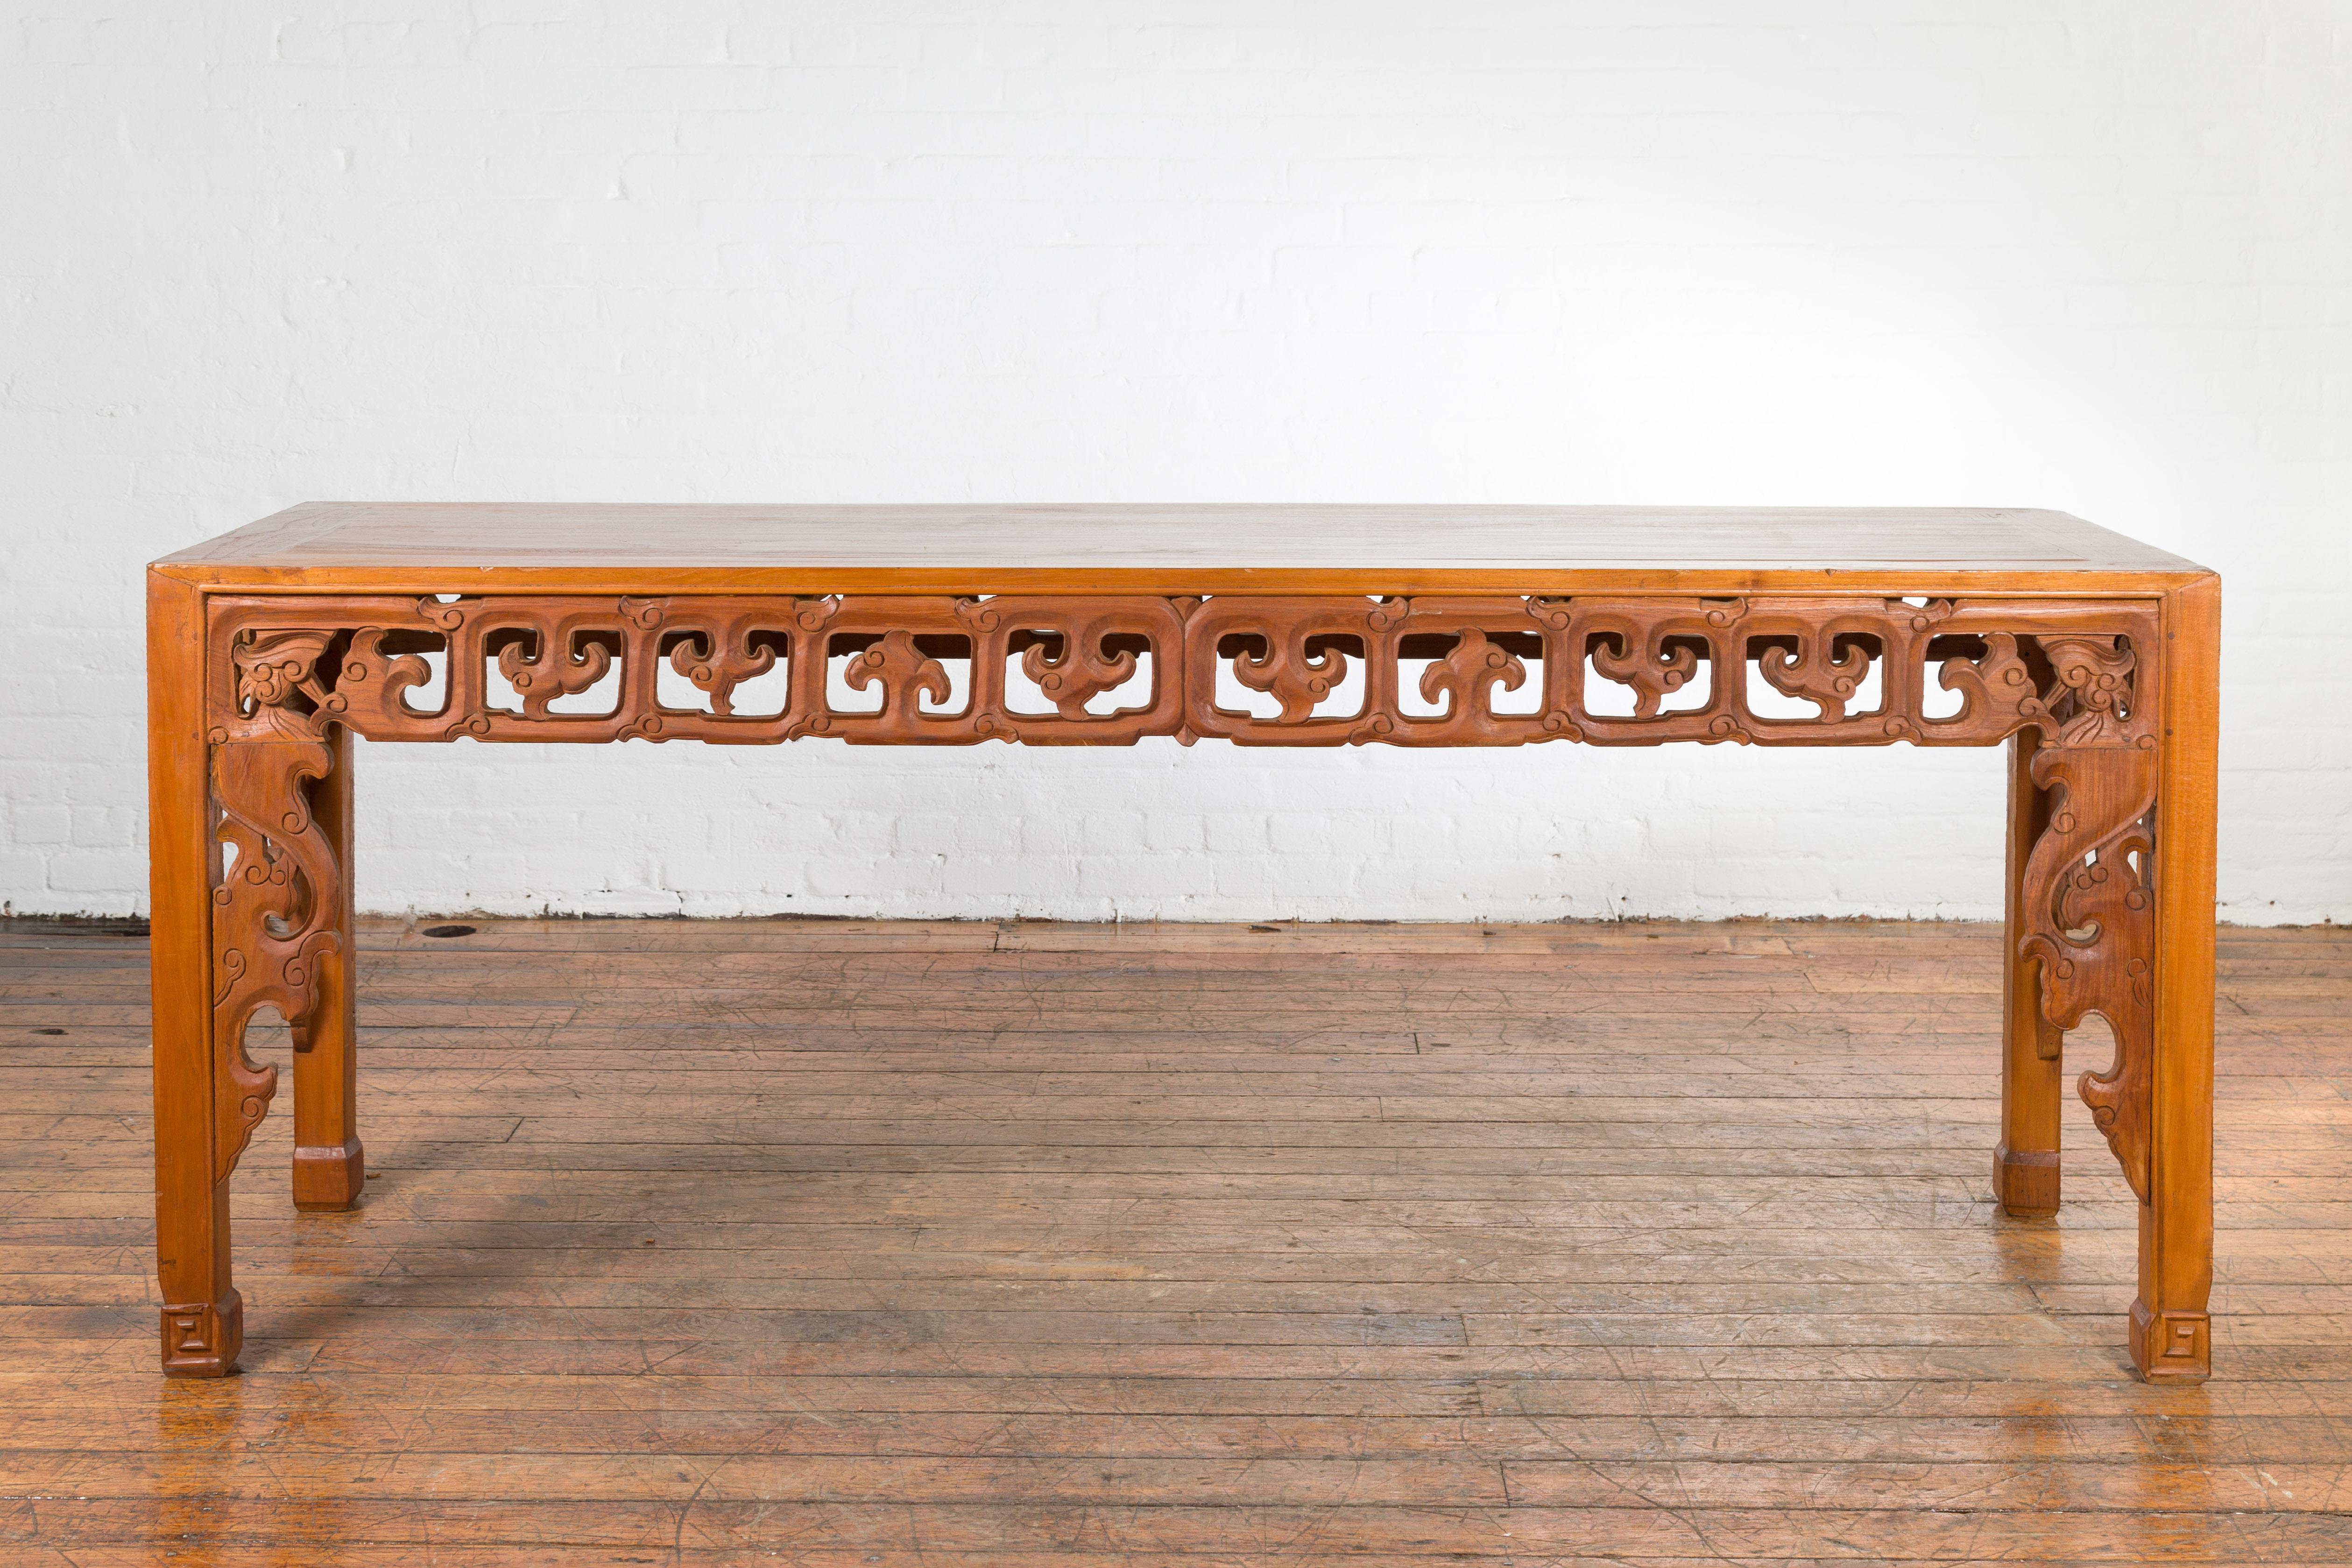 An Indonesian Chinese style vintage teak wood altar table from the mid 20th century with carved motifs. Found in Madura, Indonesia, this console table features a rectangular top with central board, sitting above a beautifully carved apron adorned